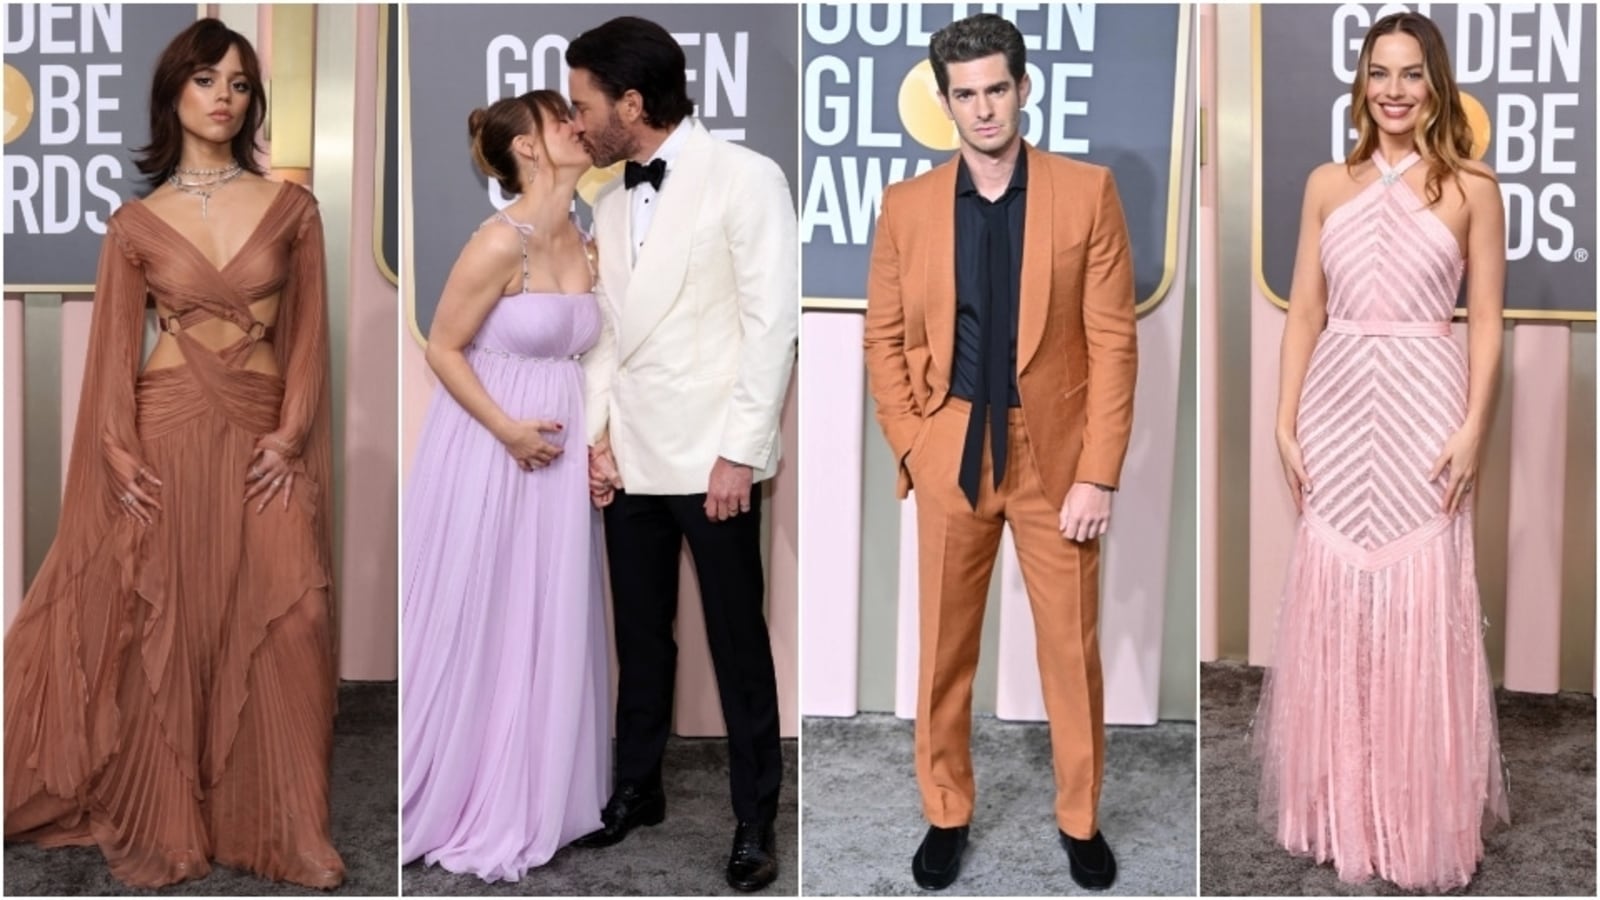 1600px x 900px - Golden Globe Awards: Jenna Ortega to Kaley Cuoco and Andrew Garfield to  Margot Robbie, who wore what at Golden Globes | Hindustan Times